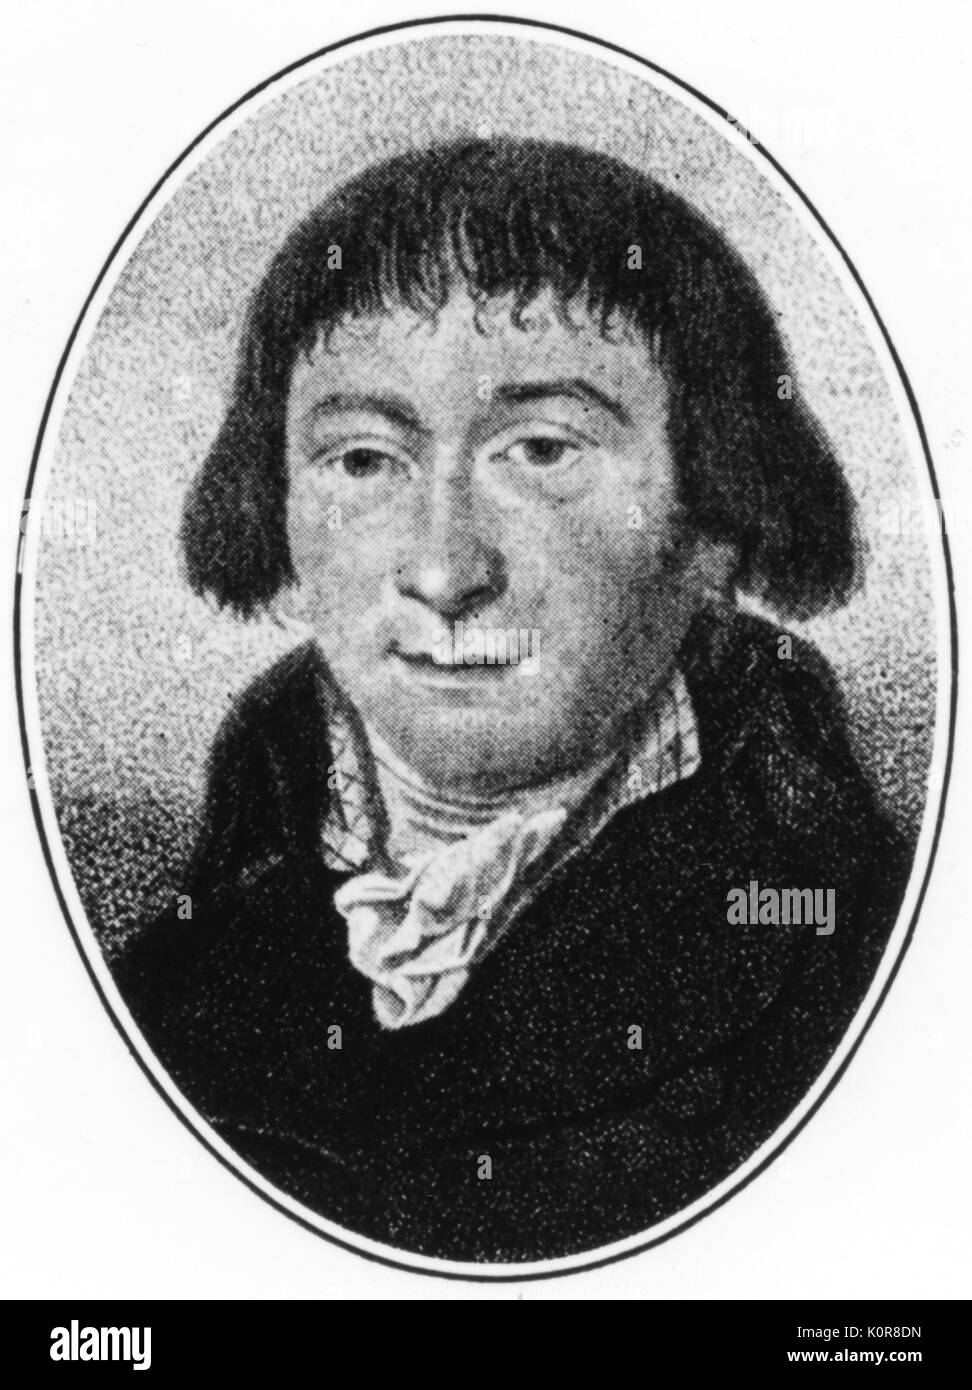 CHLADNI, Ernst Floris Friedrich 1756-1827 engraving by F W Bollinger.  German acoustician. Discovered Tonfiguren (tone figures, invented Euphonium (glass rod harmonica) and clavicylinder. Stock Photo